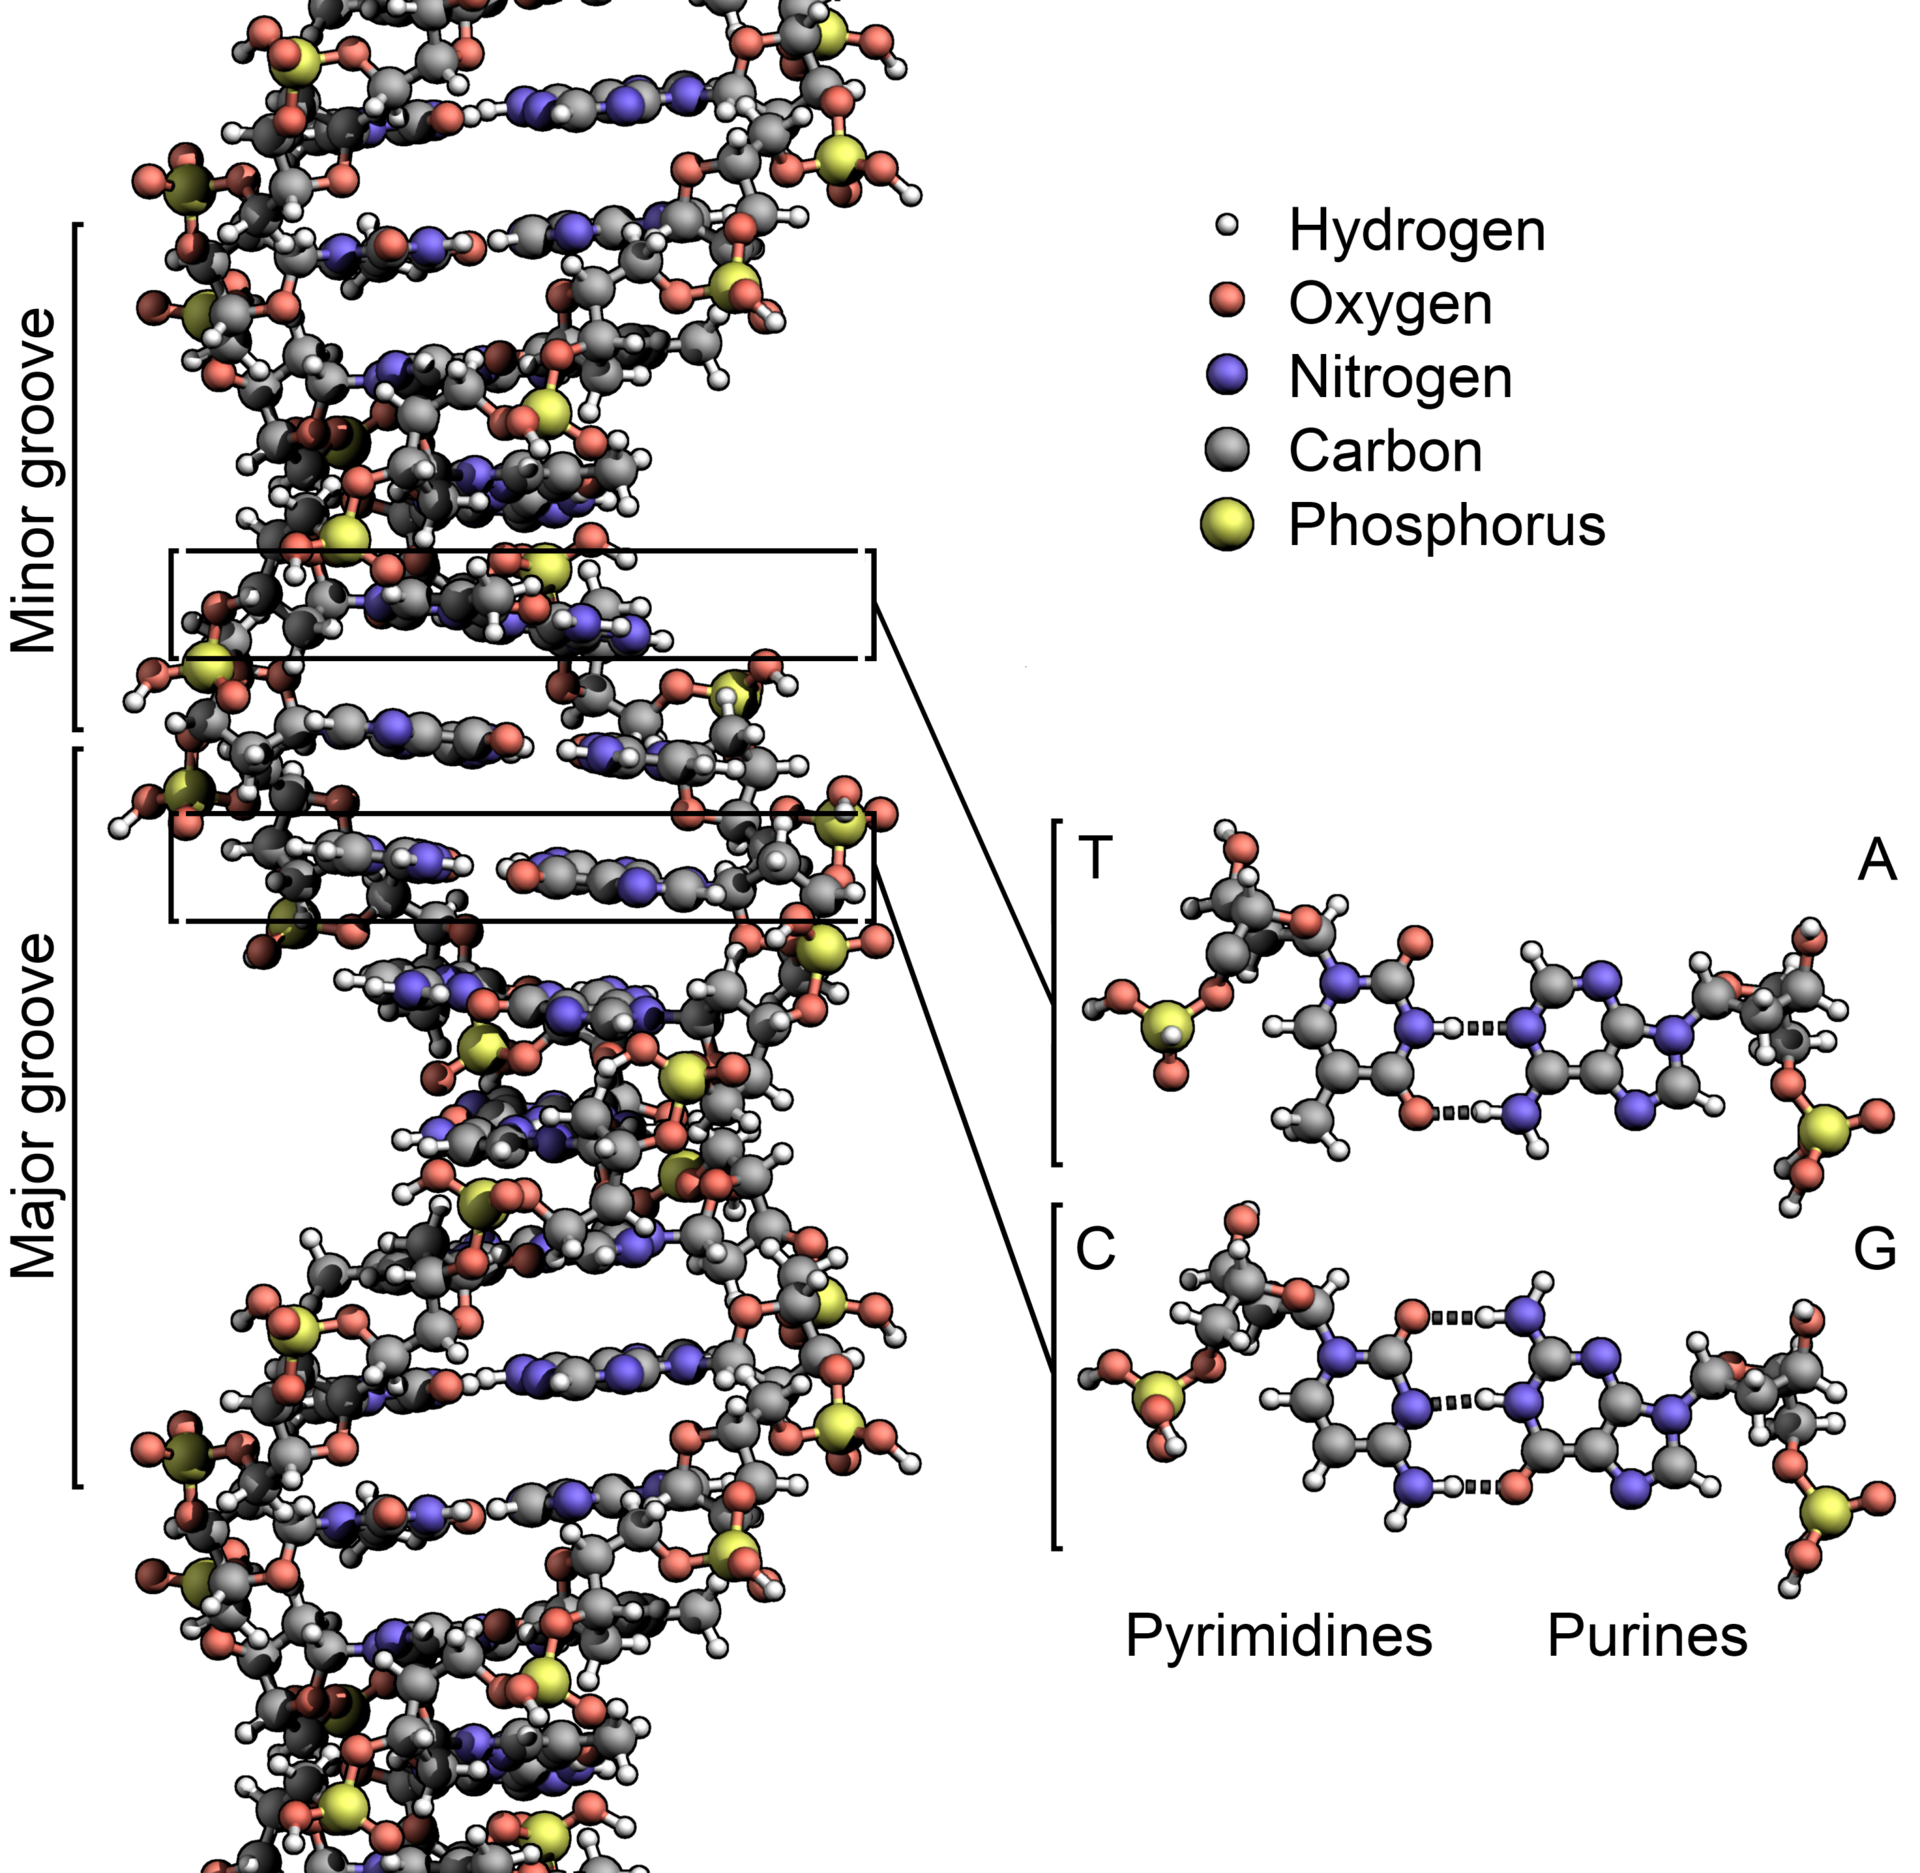 DNA_Structure